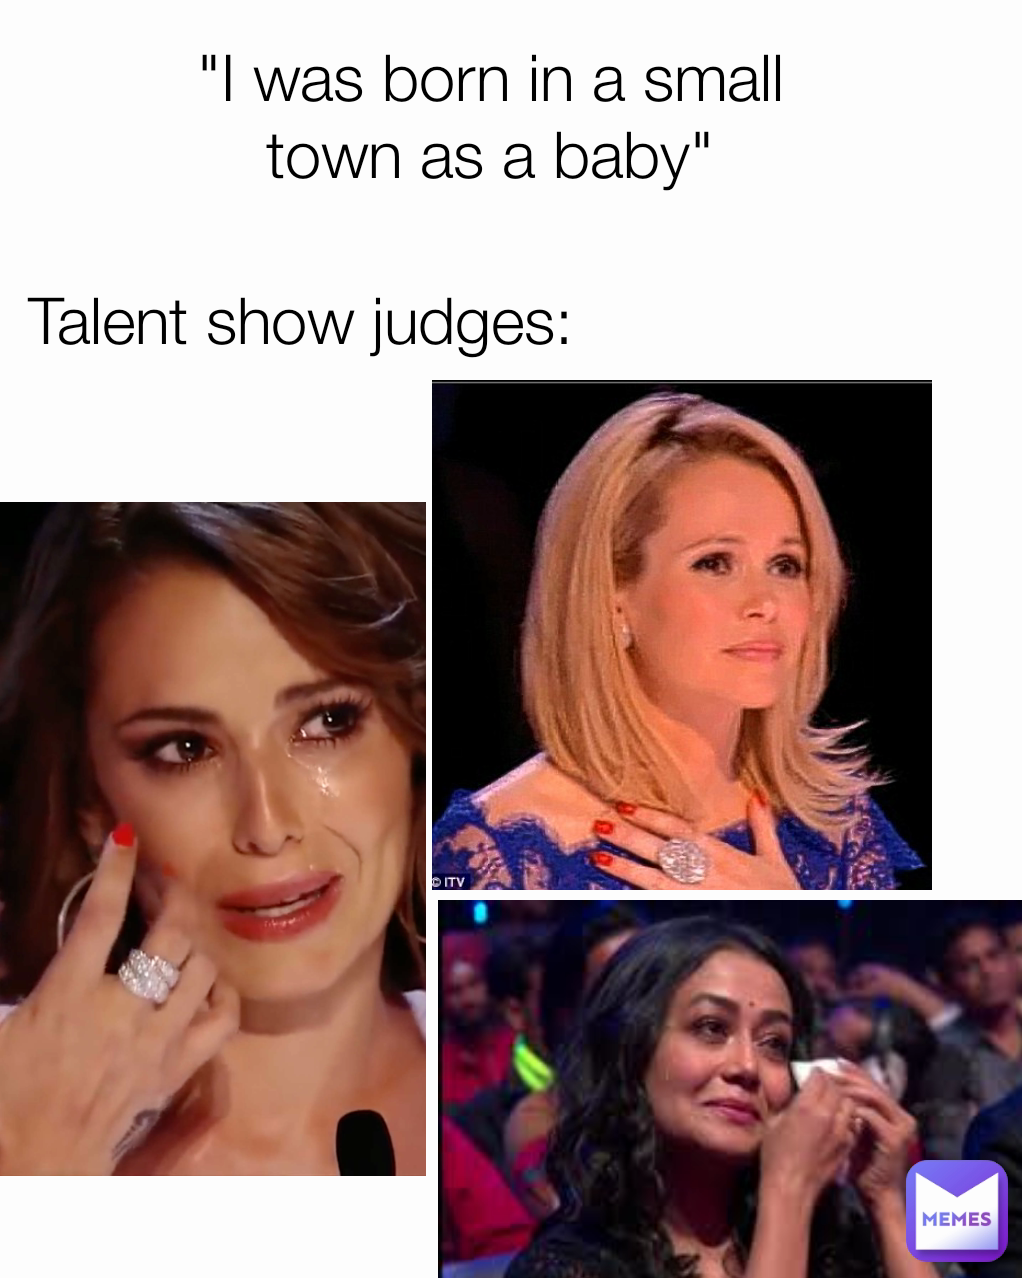 Talent show judges: "I was born in a small town as a baby"